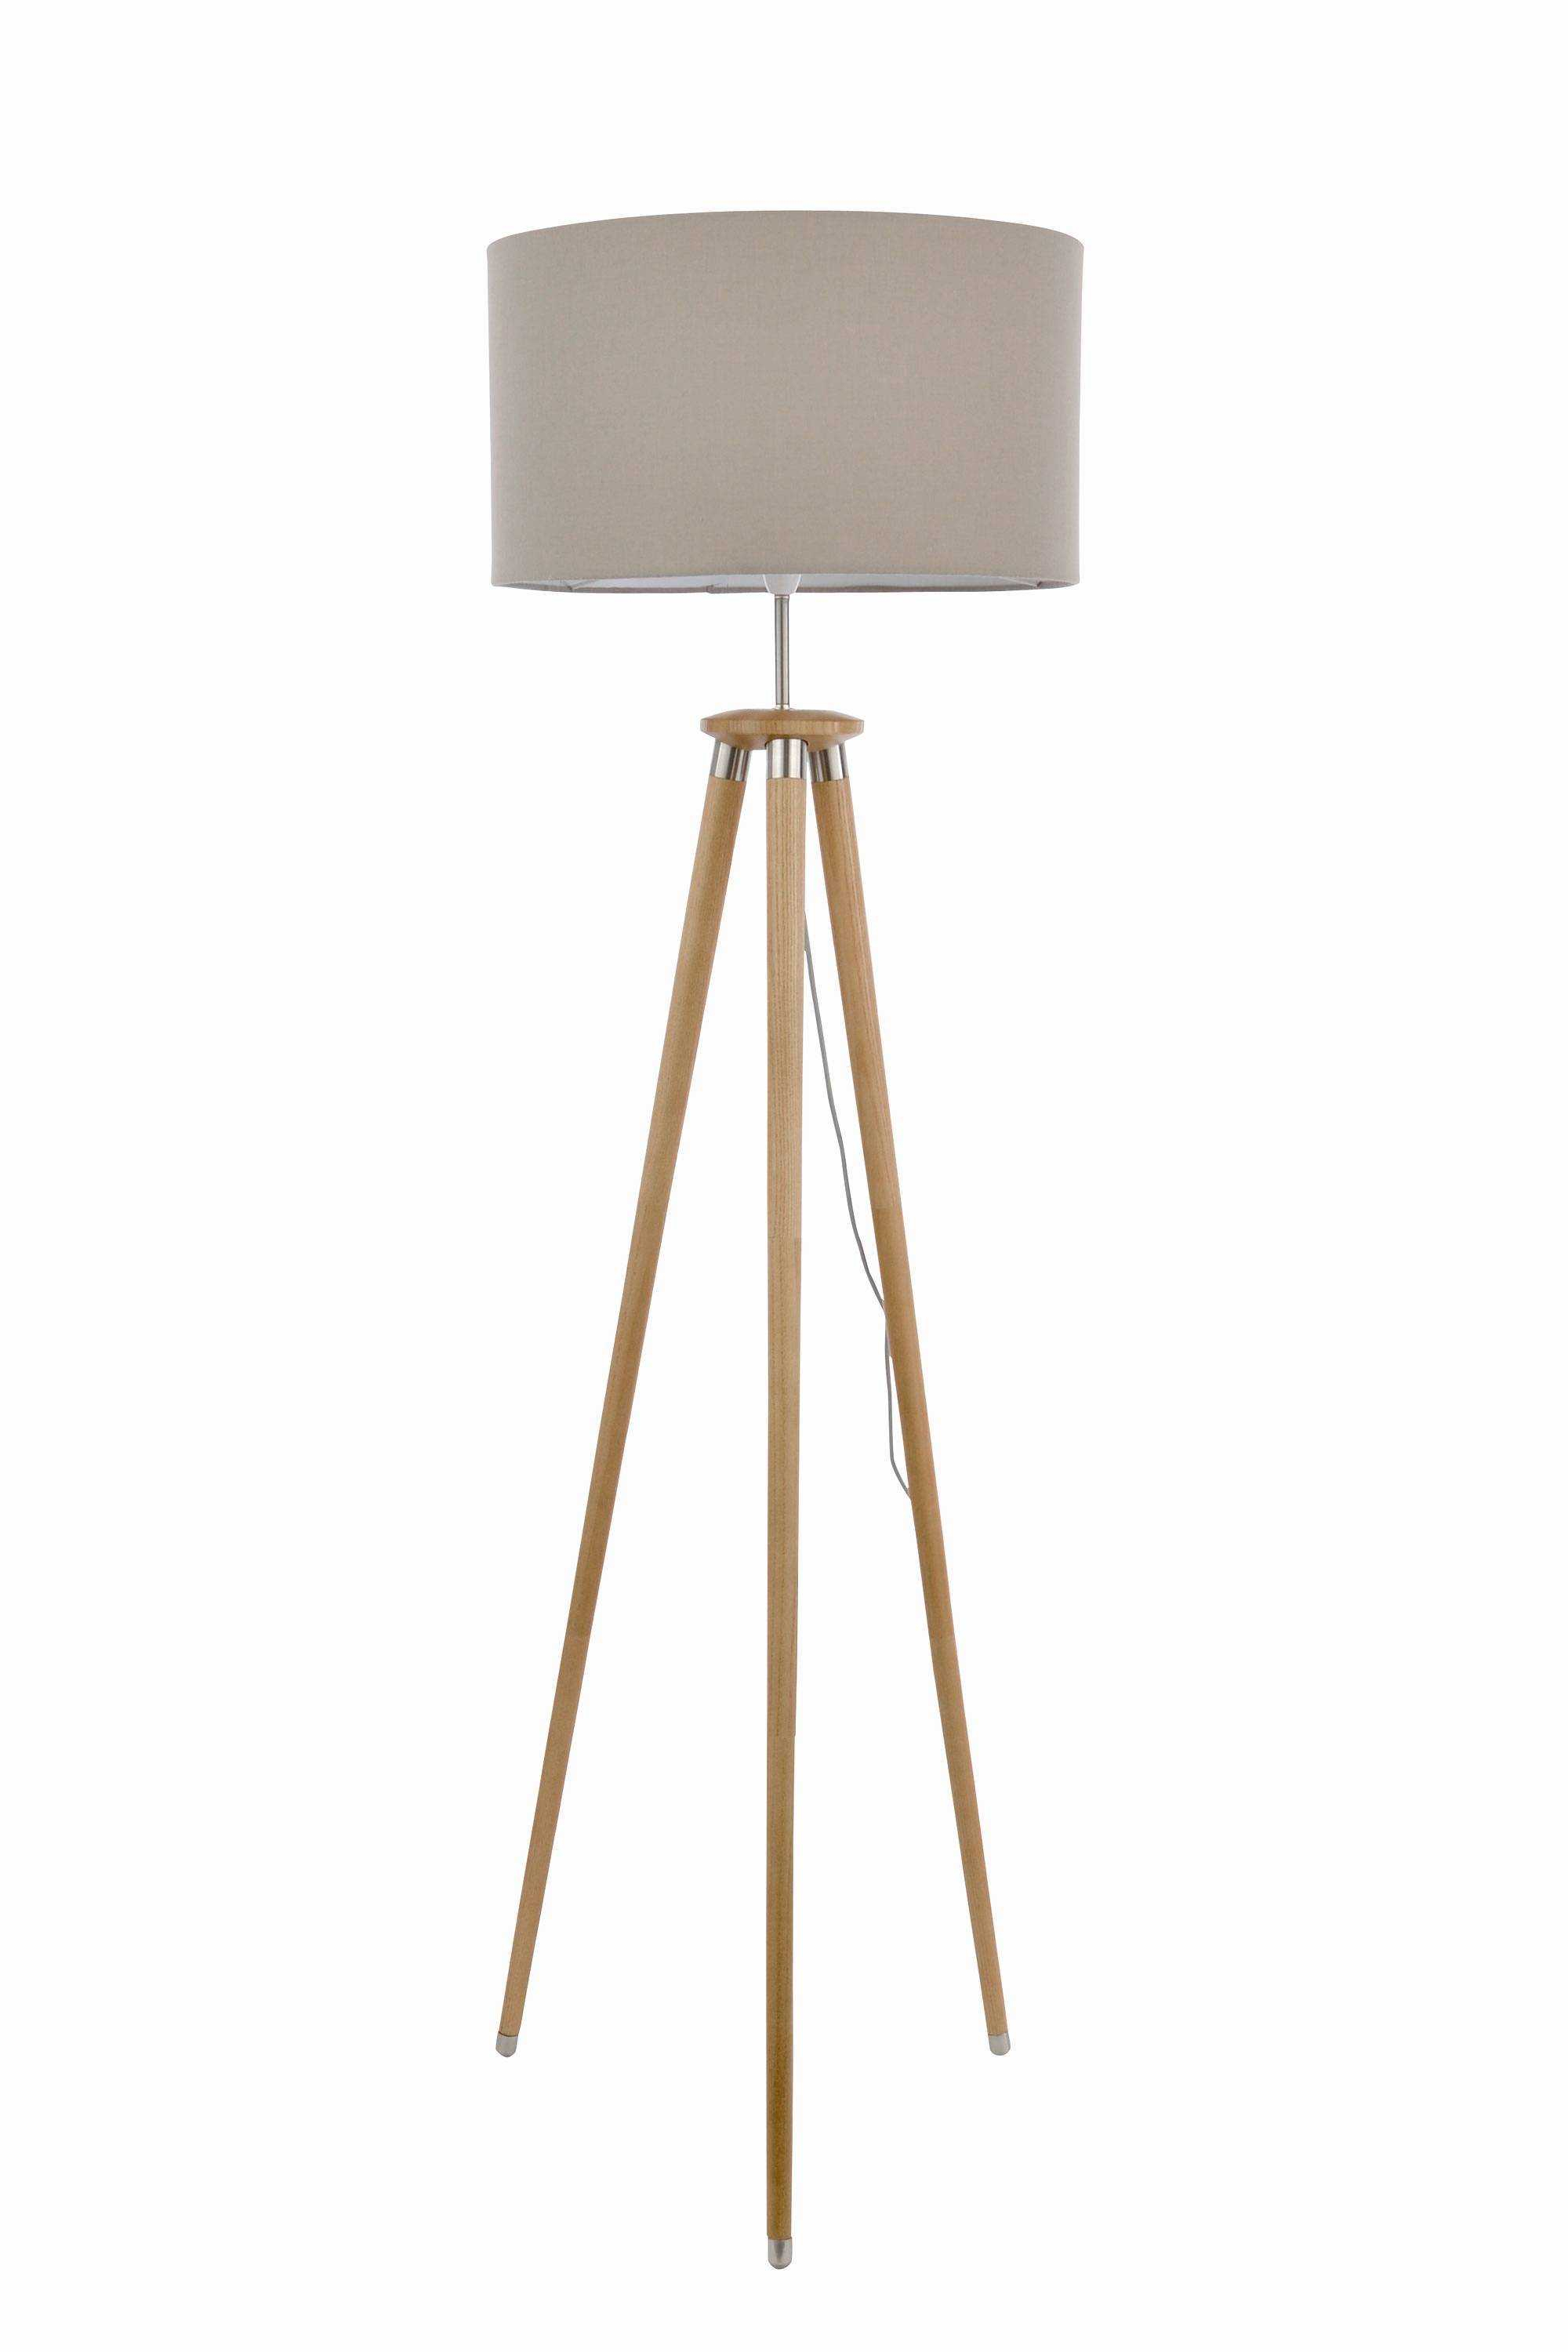 Awesome Simpson 4 Light Floor Lamp And Design Classic inside proportions 2000 X 3000